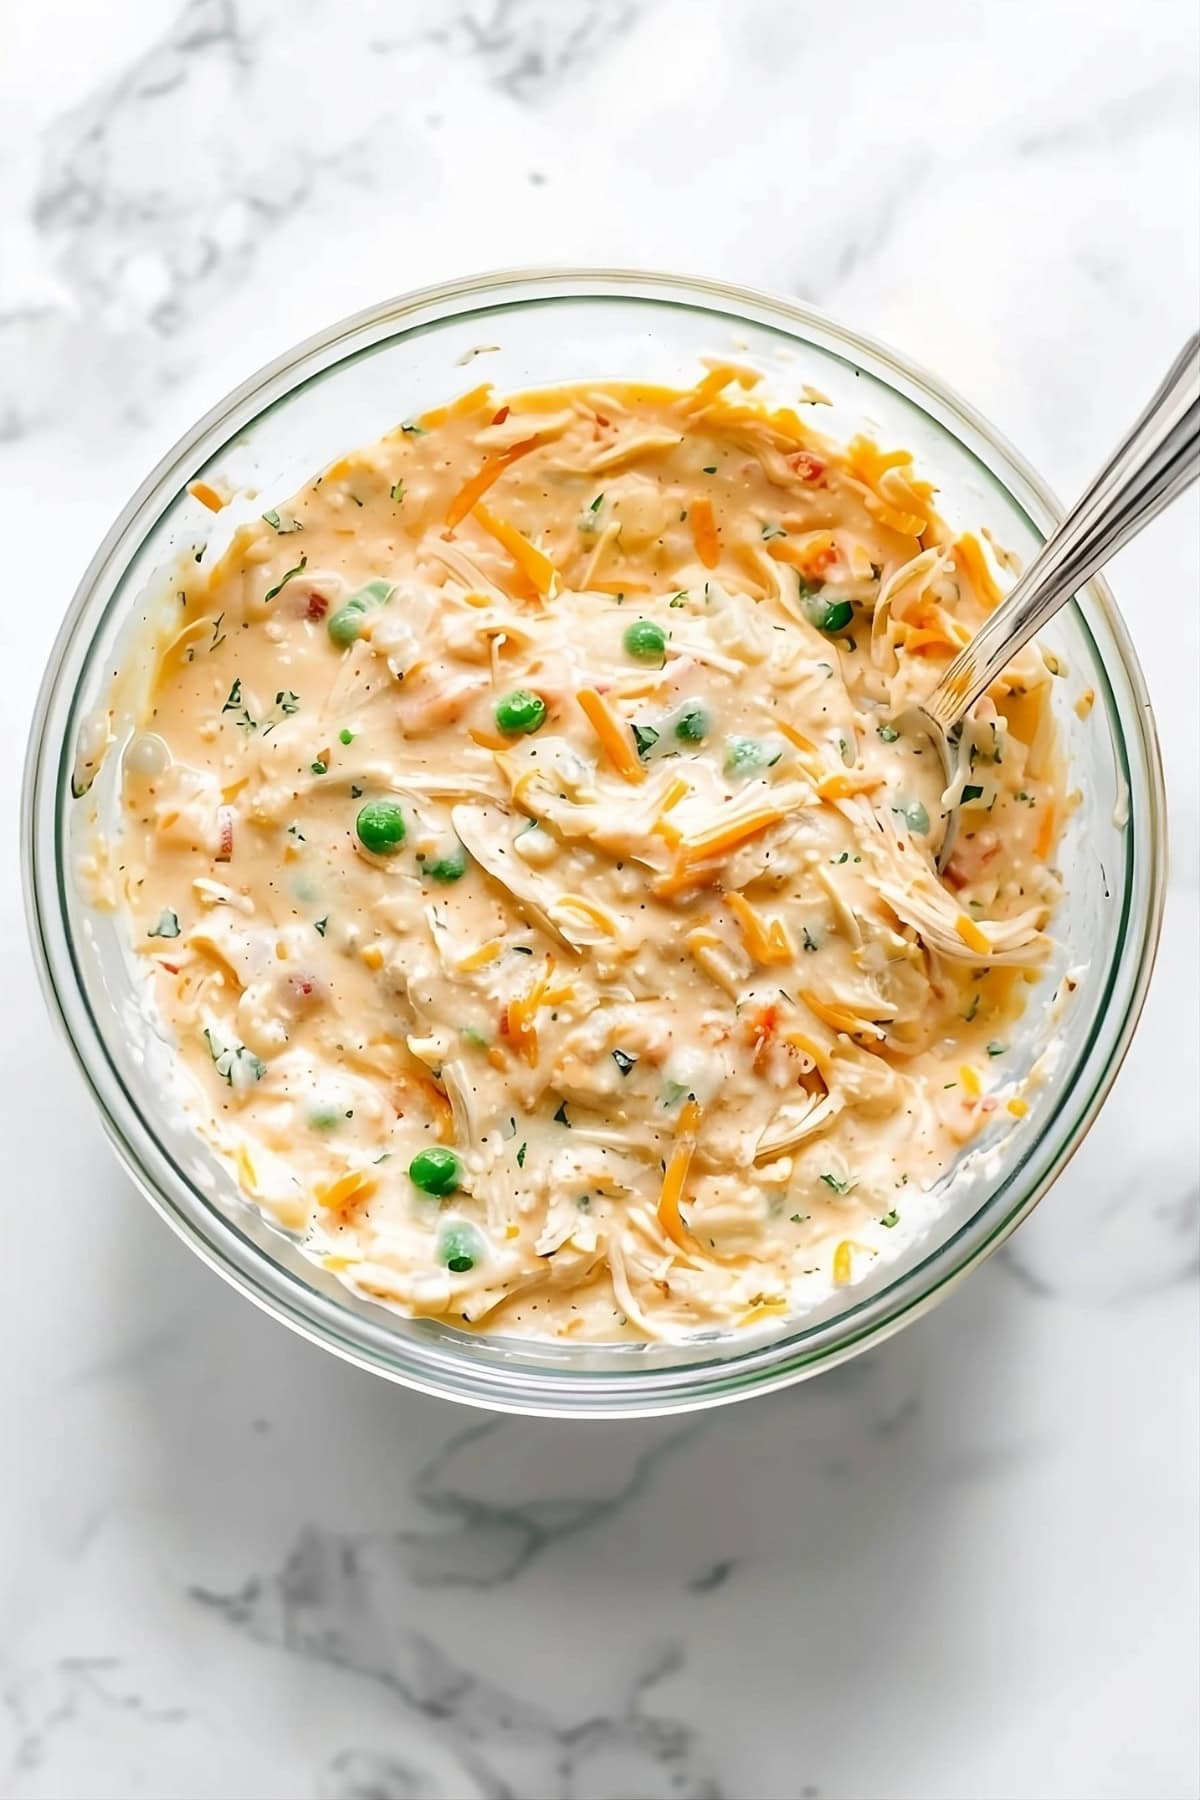 Bowl with a mix of shredded chicken, cream of chicken soup, sour cream, milk, diced onion, peas and carrots, garlic powder, parsley, salt, pepper, and cheddar cheese.